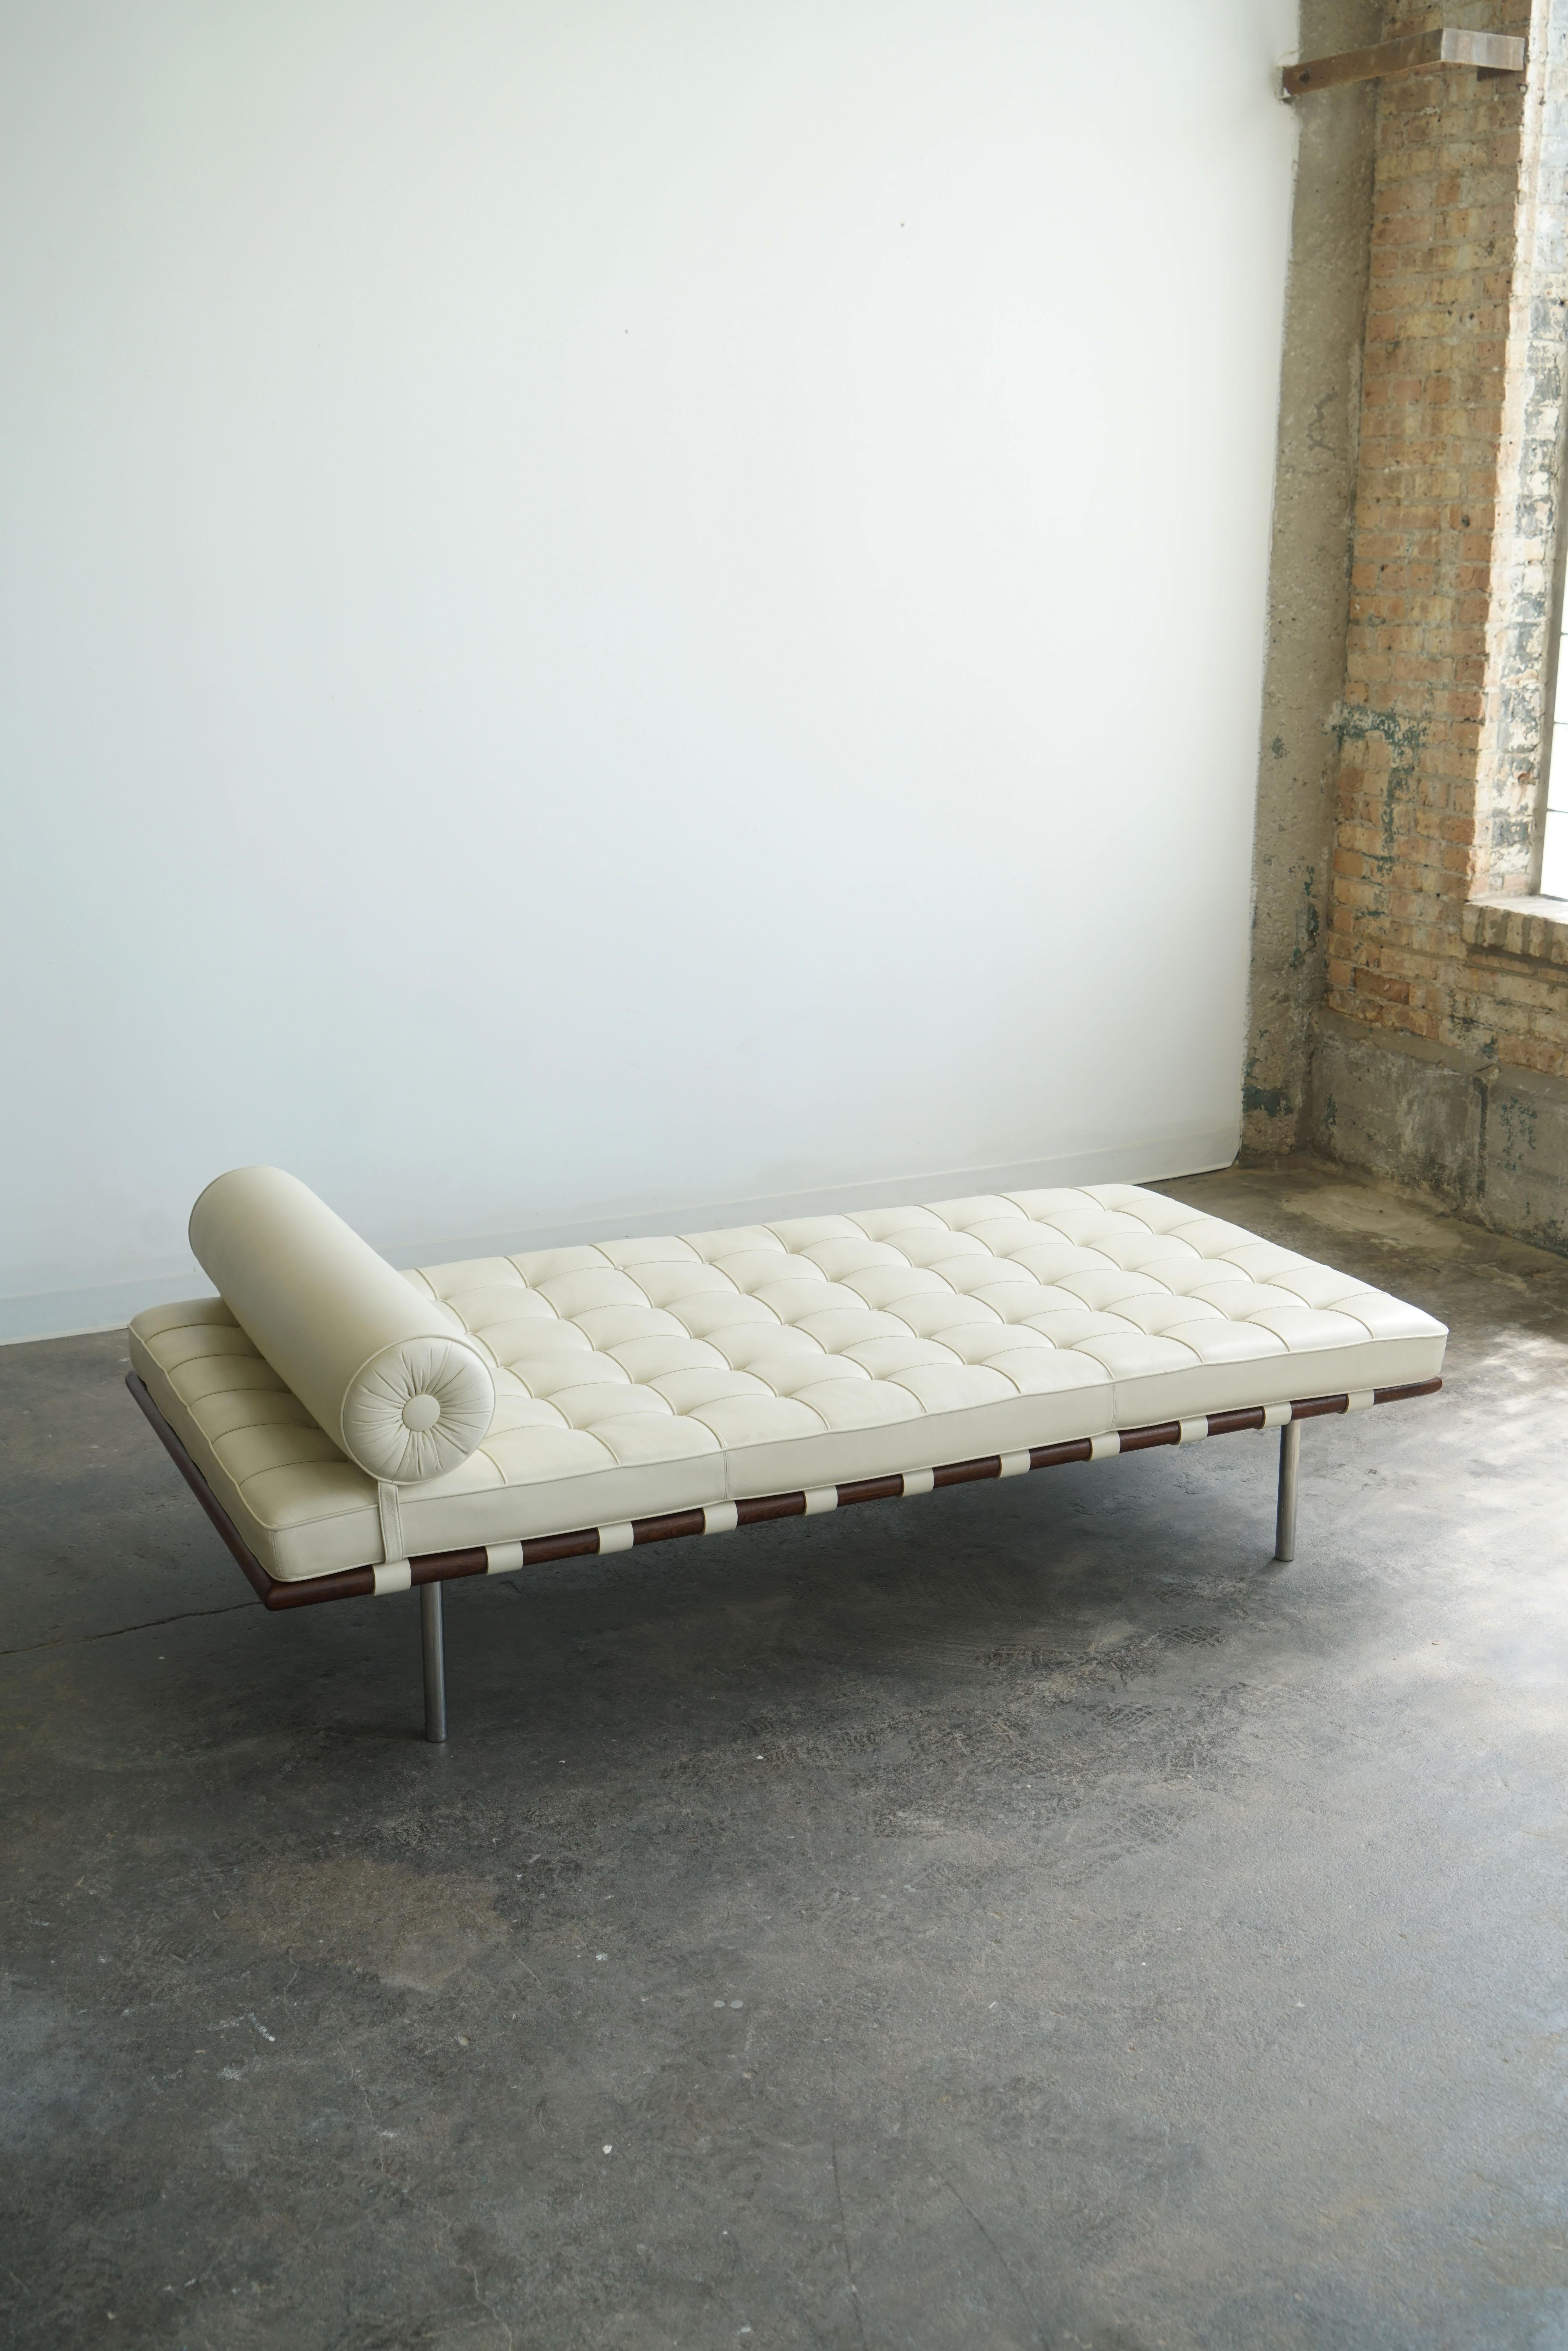 Knoll Barcelona Couch / Daybed, Model 258L.
Designed by Mies van der Rohe, originally in 1930. 
in Volo 